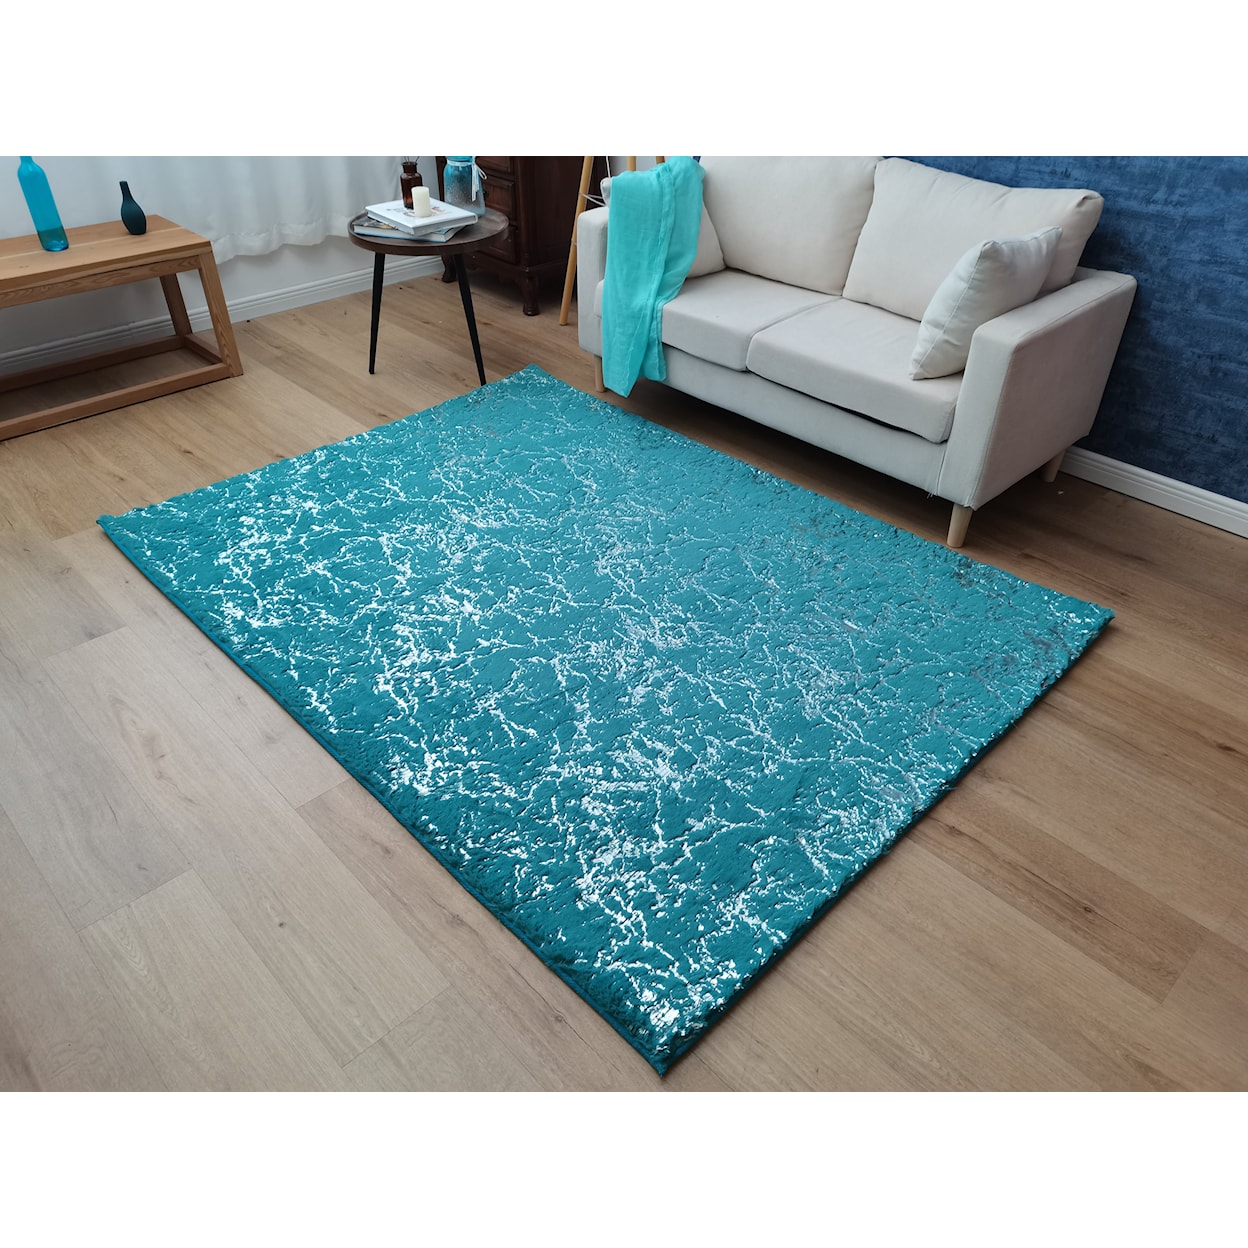 Zinatex Timmy Shaggy S Edition TURQUOISE SILVER 5X8 AREA RUG |